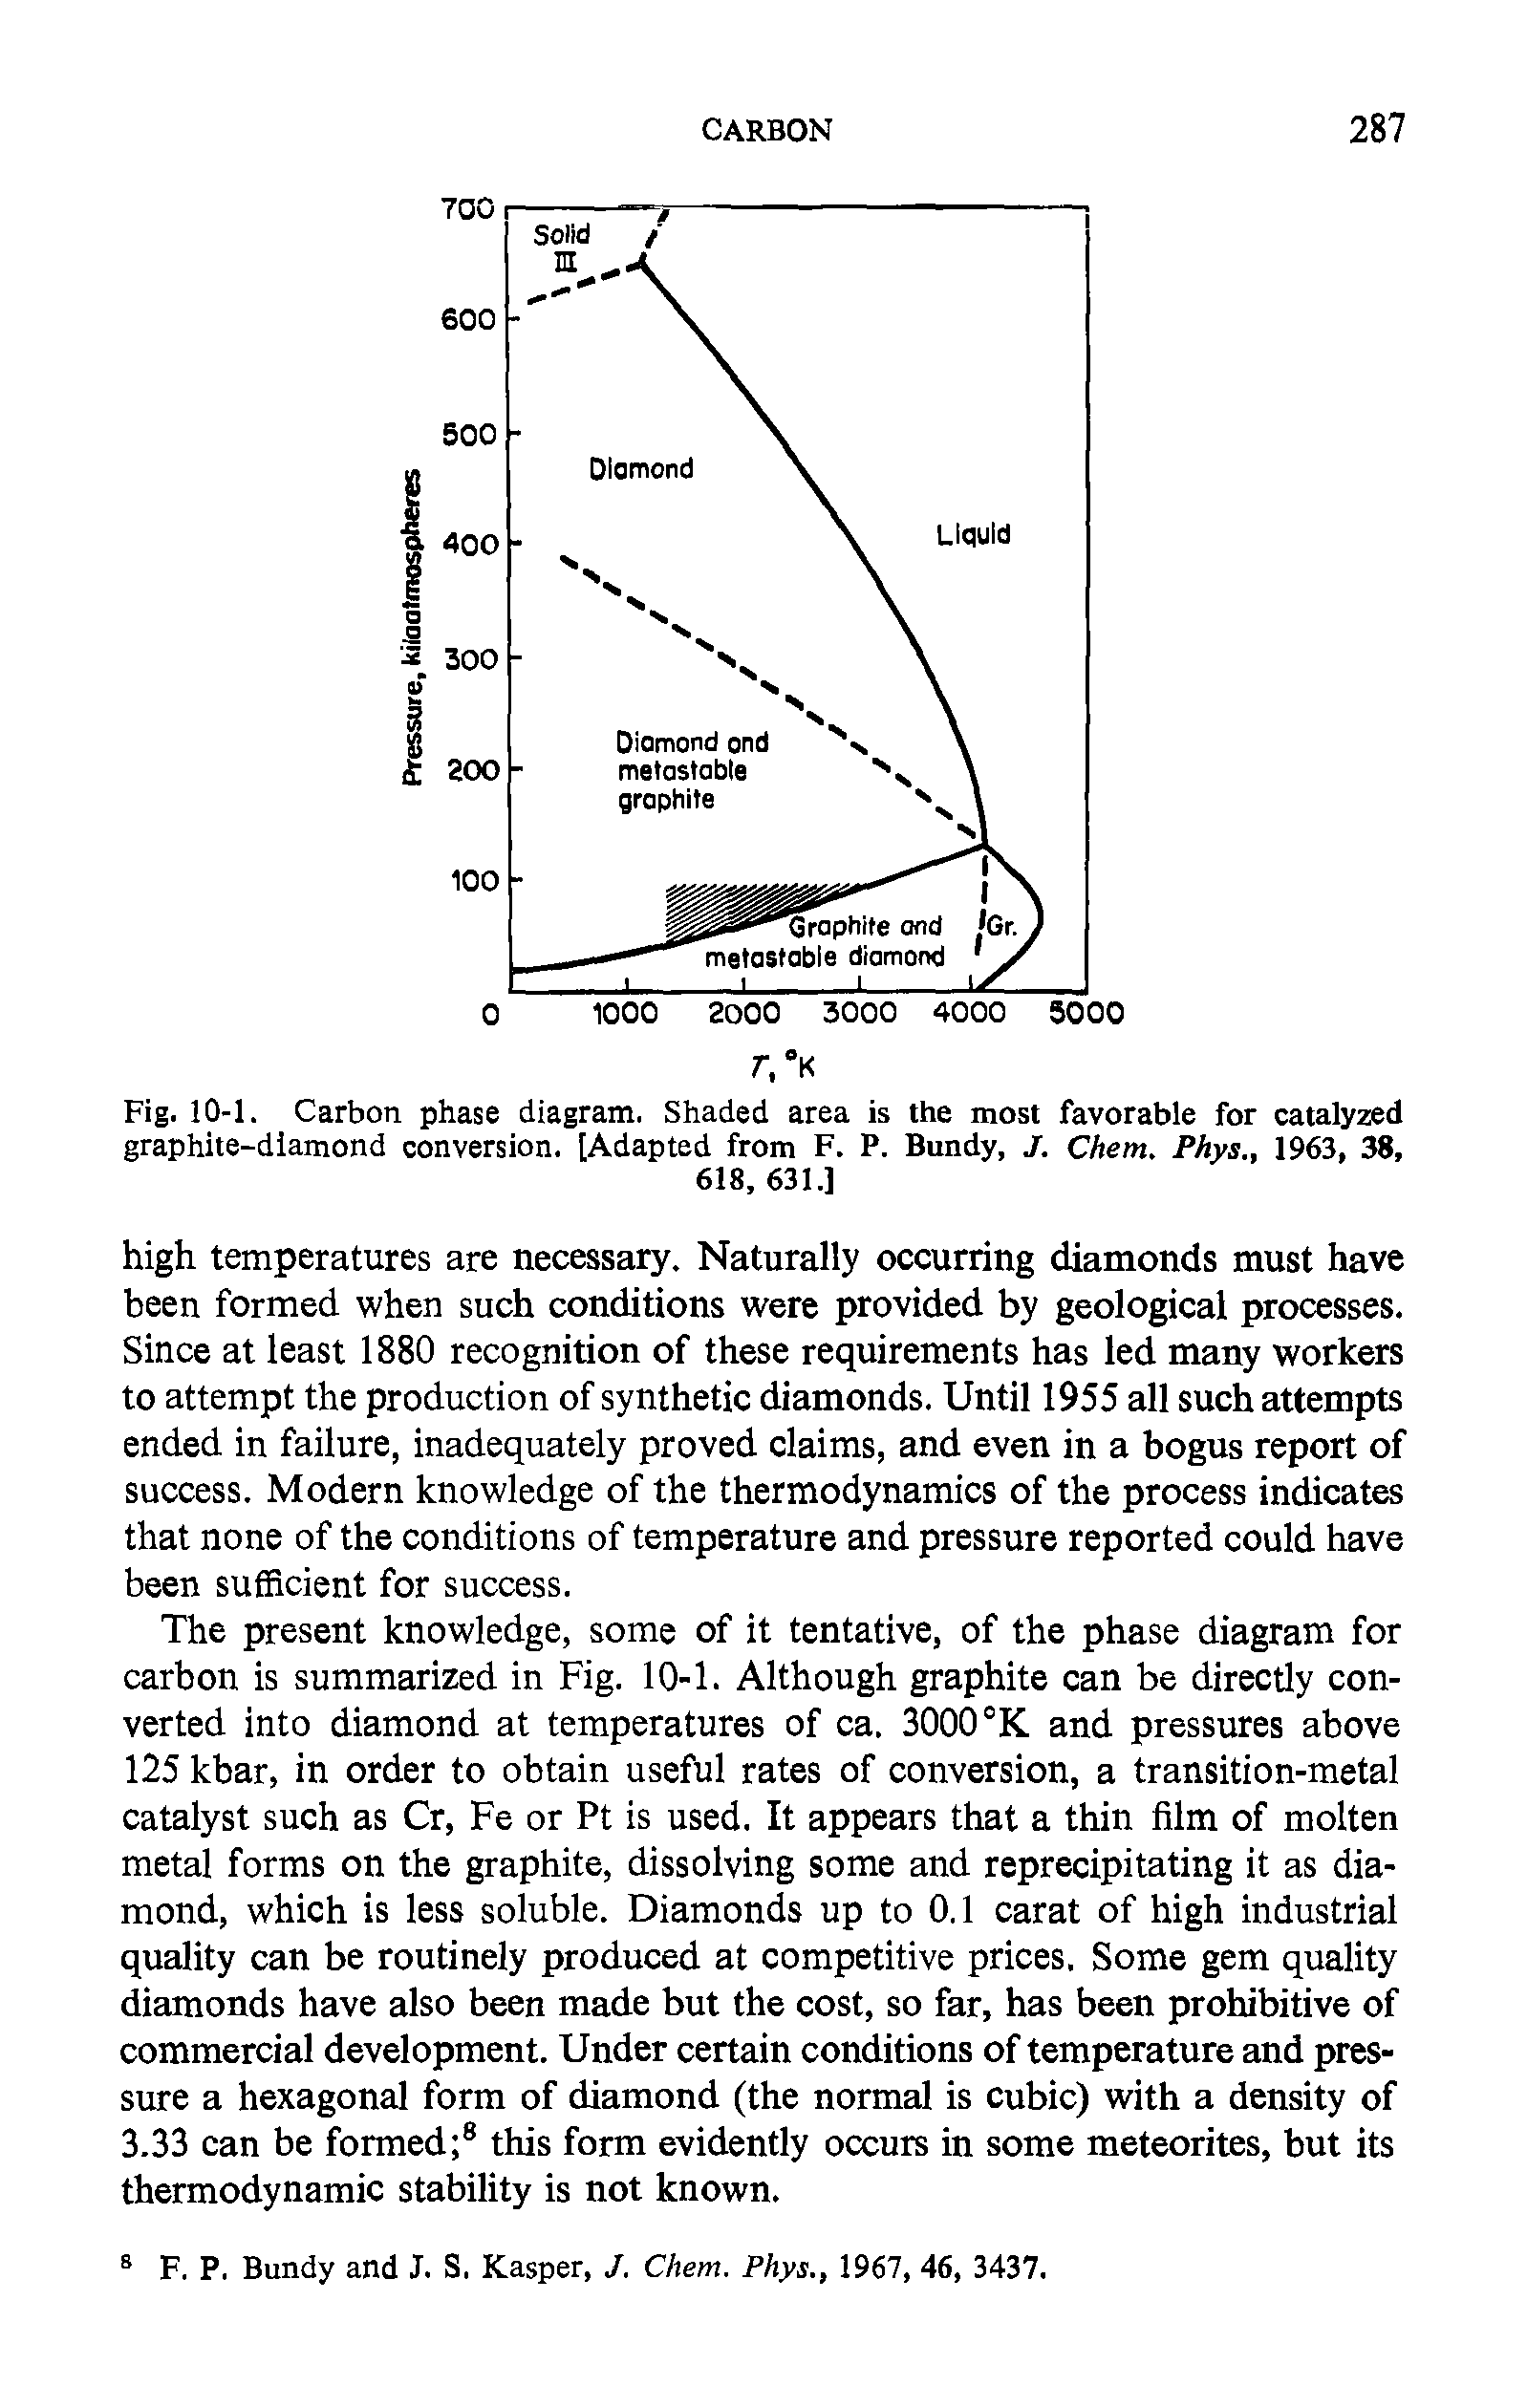 Fig. 10-1. Carbon phase diagram. Shaded area is the most favorable for catalyzed graphite-diamond conversion. [Adapted from F. P. Bundy, J. Chem. Phys., 1963, 38,...